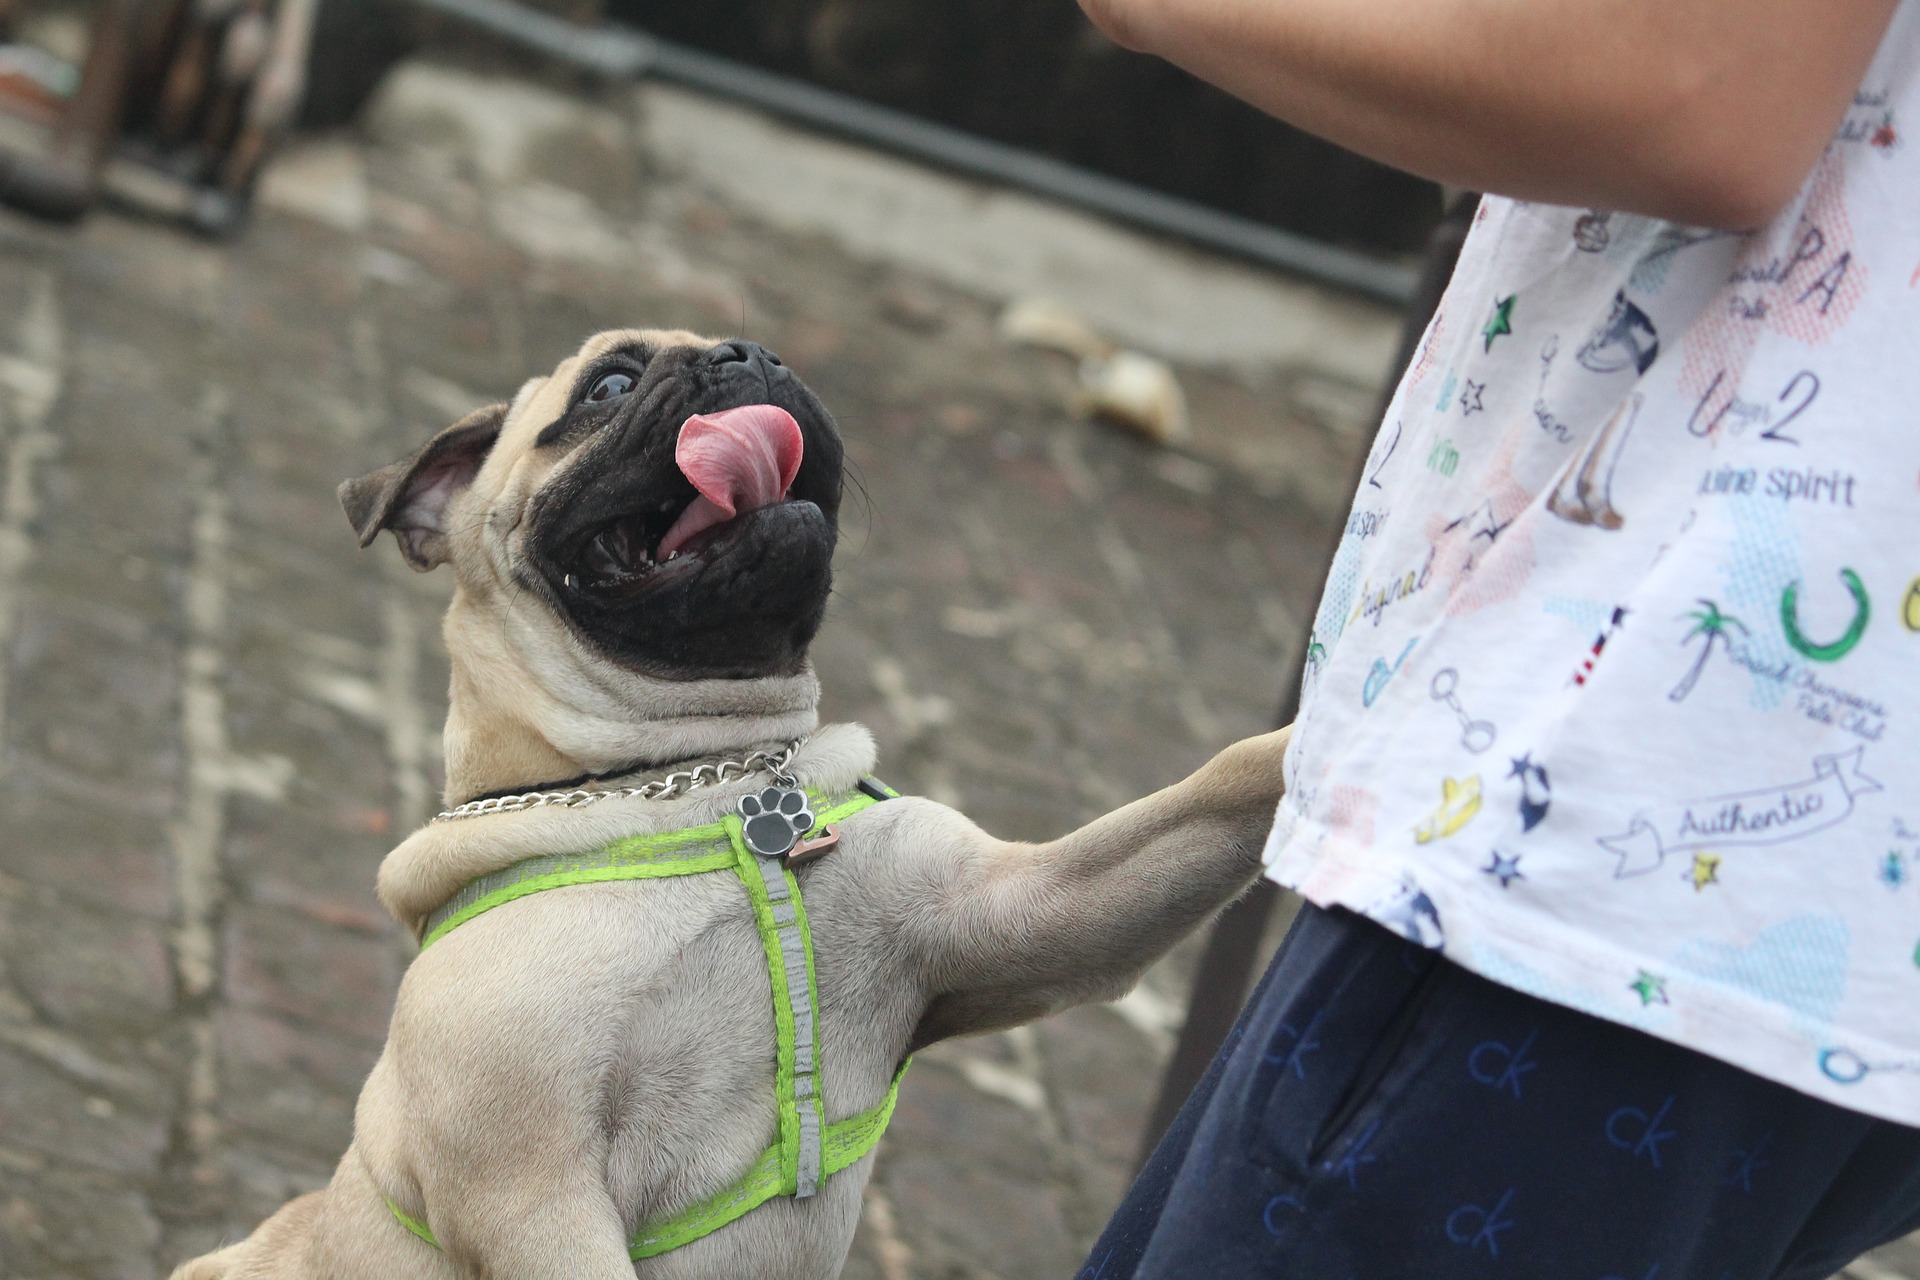 Pug dog jumping on person.